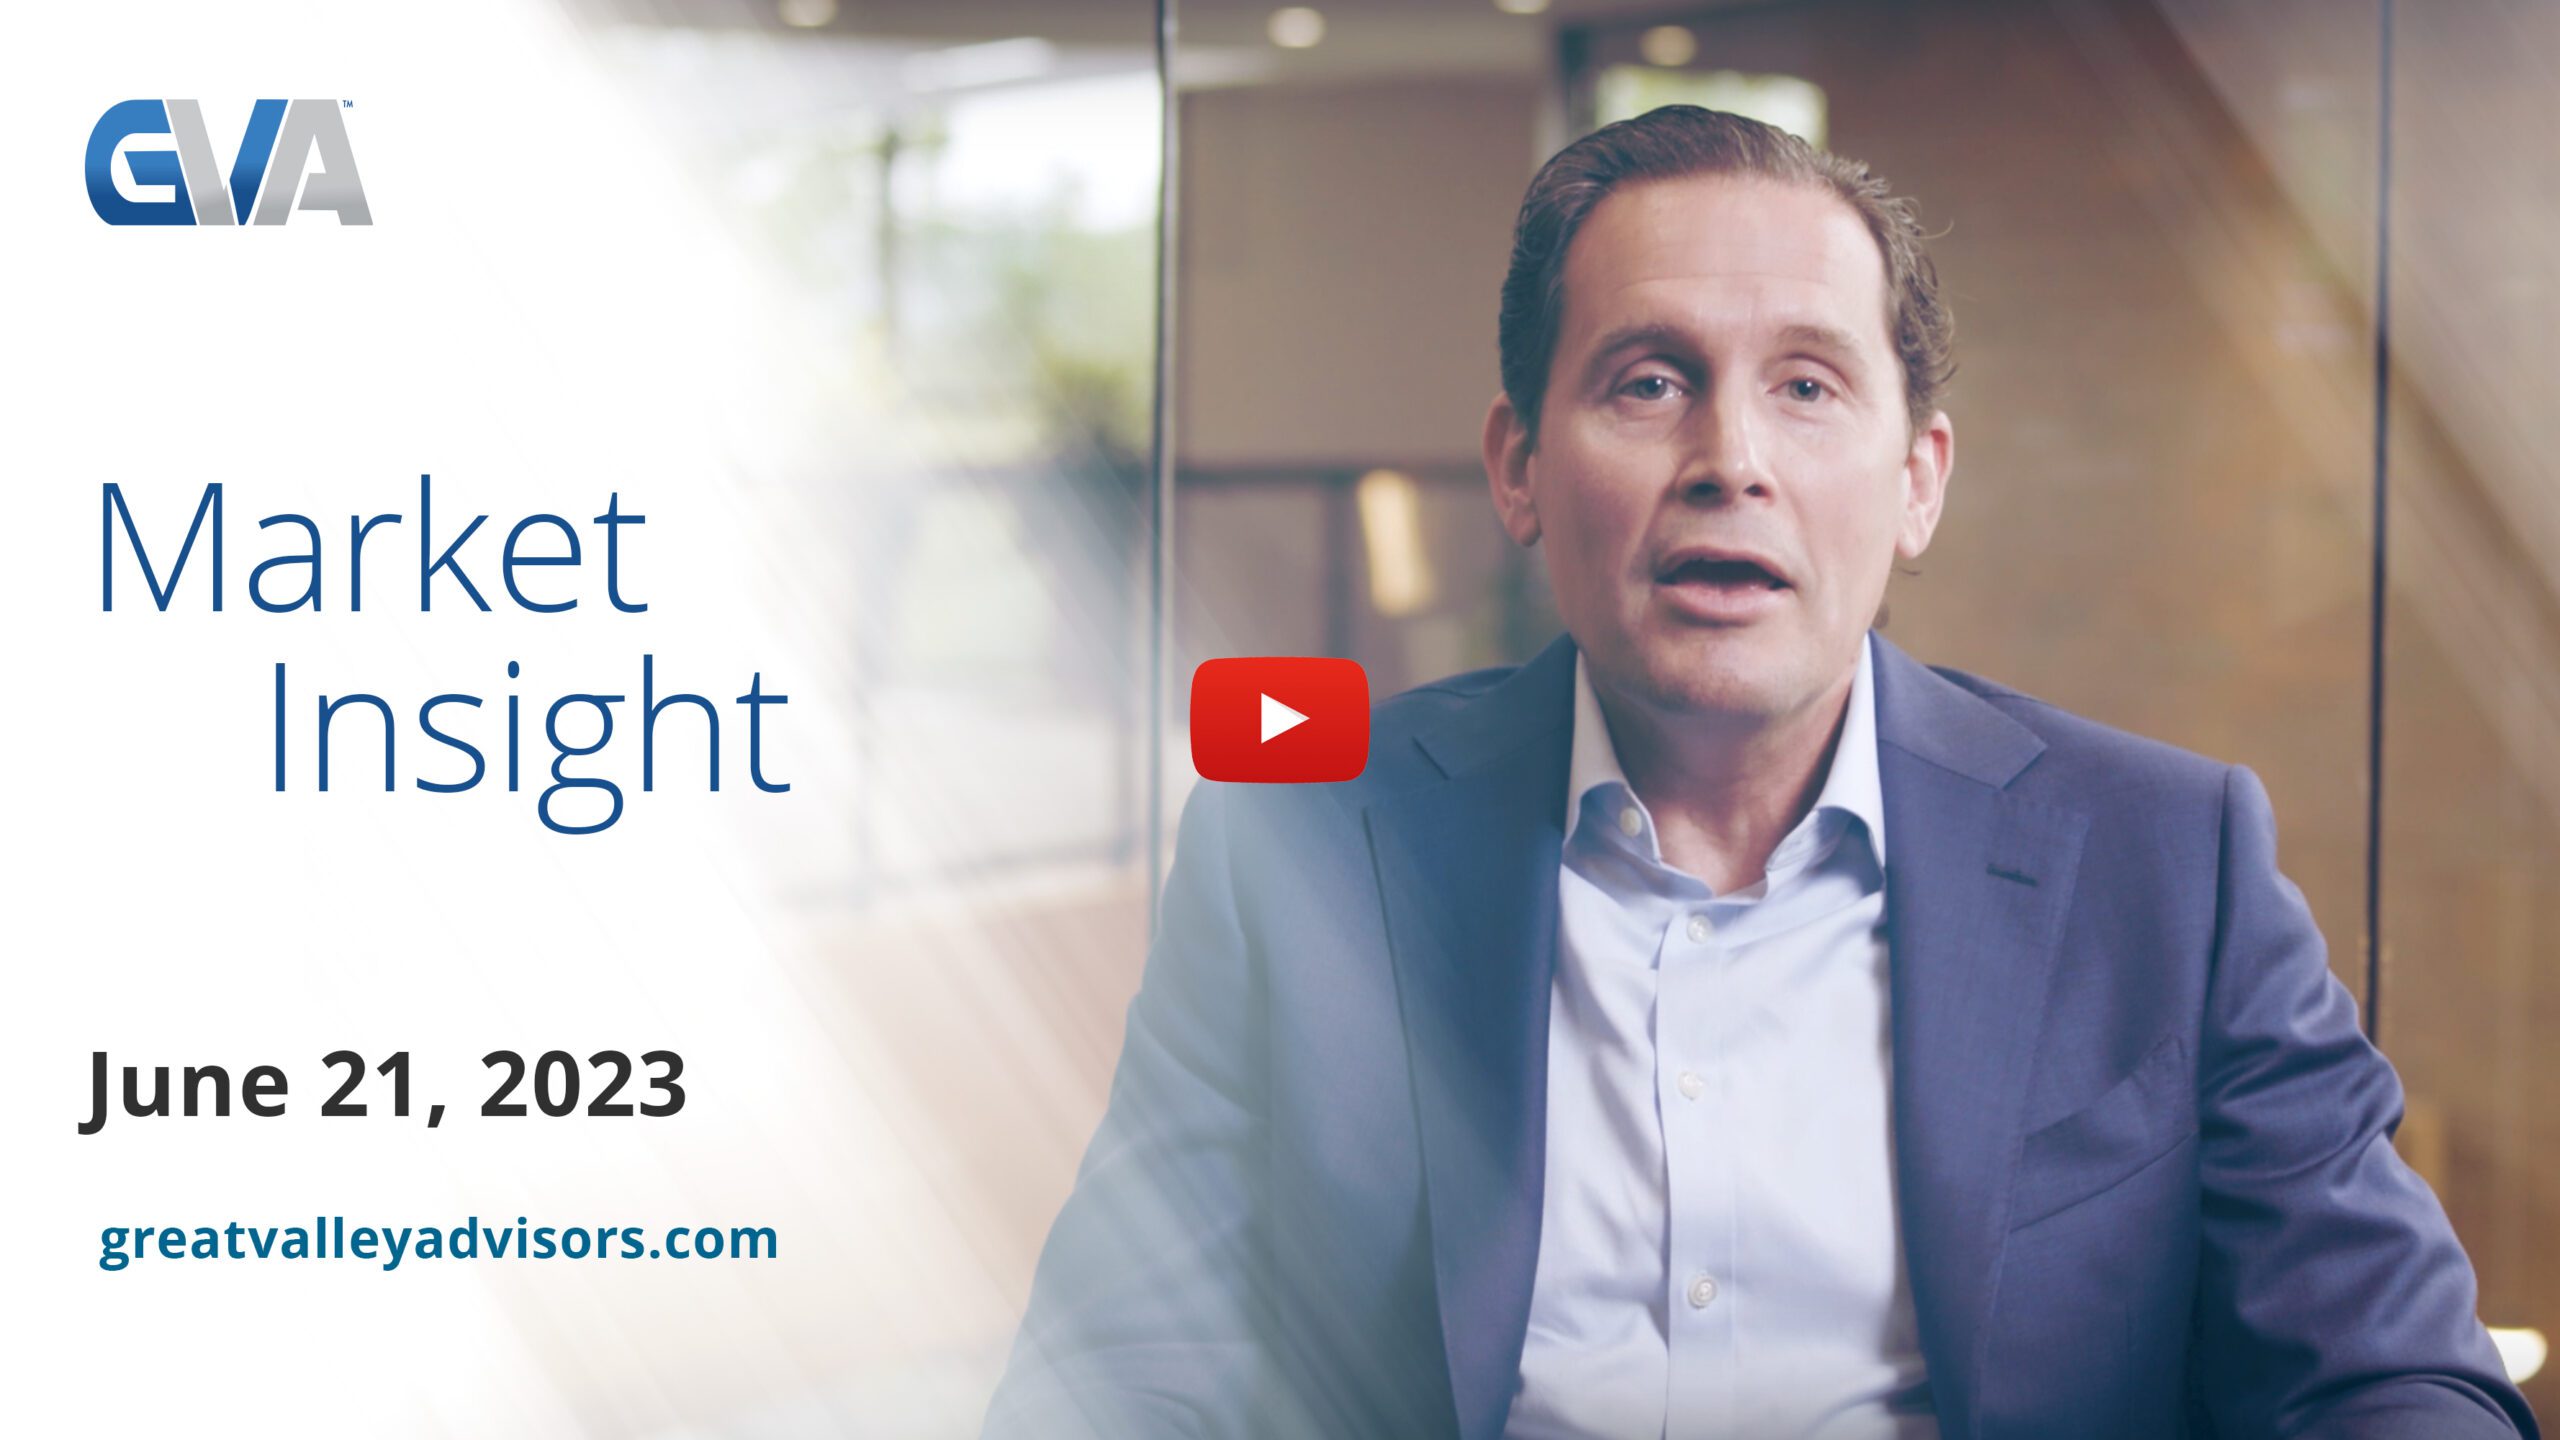 Market Insights with Eric: Episode 3, June 21, 2023